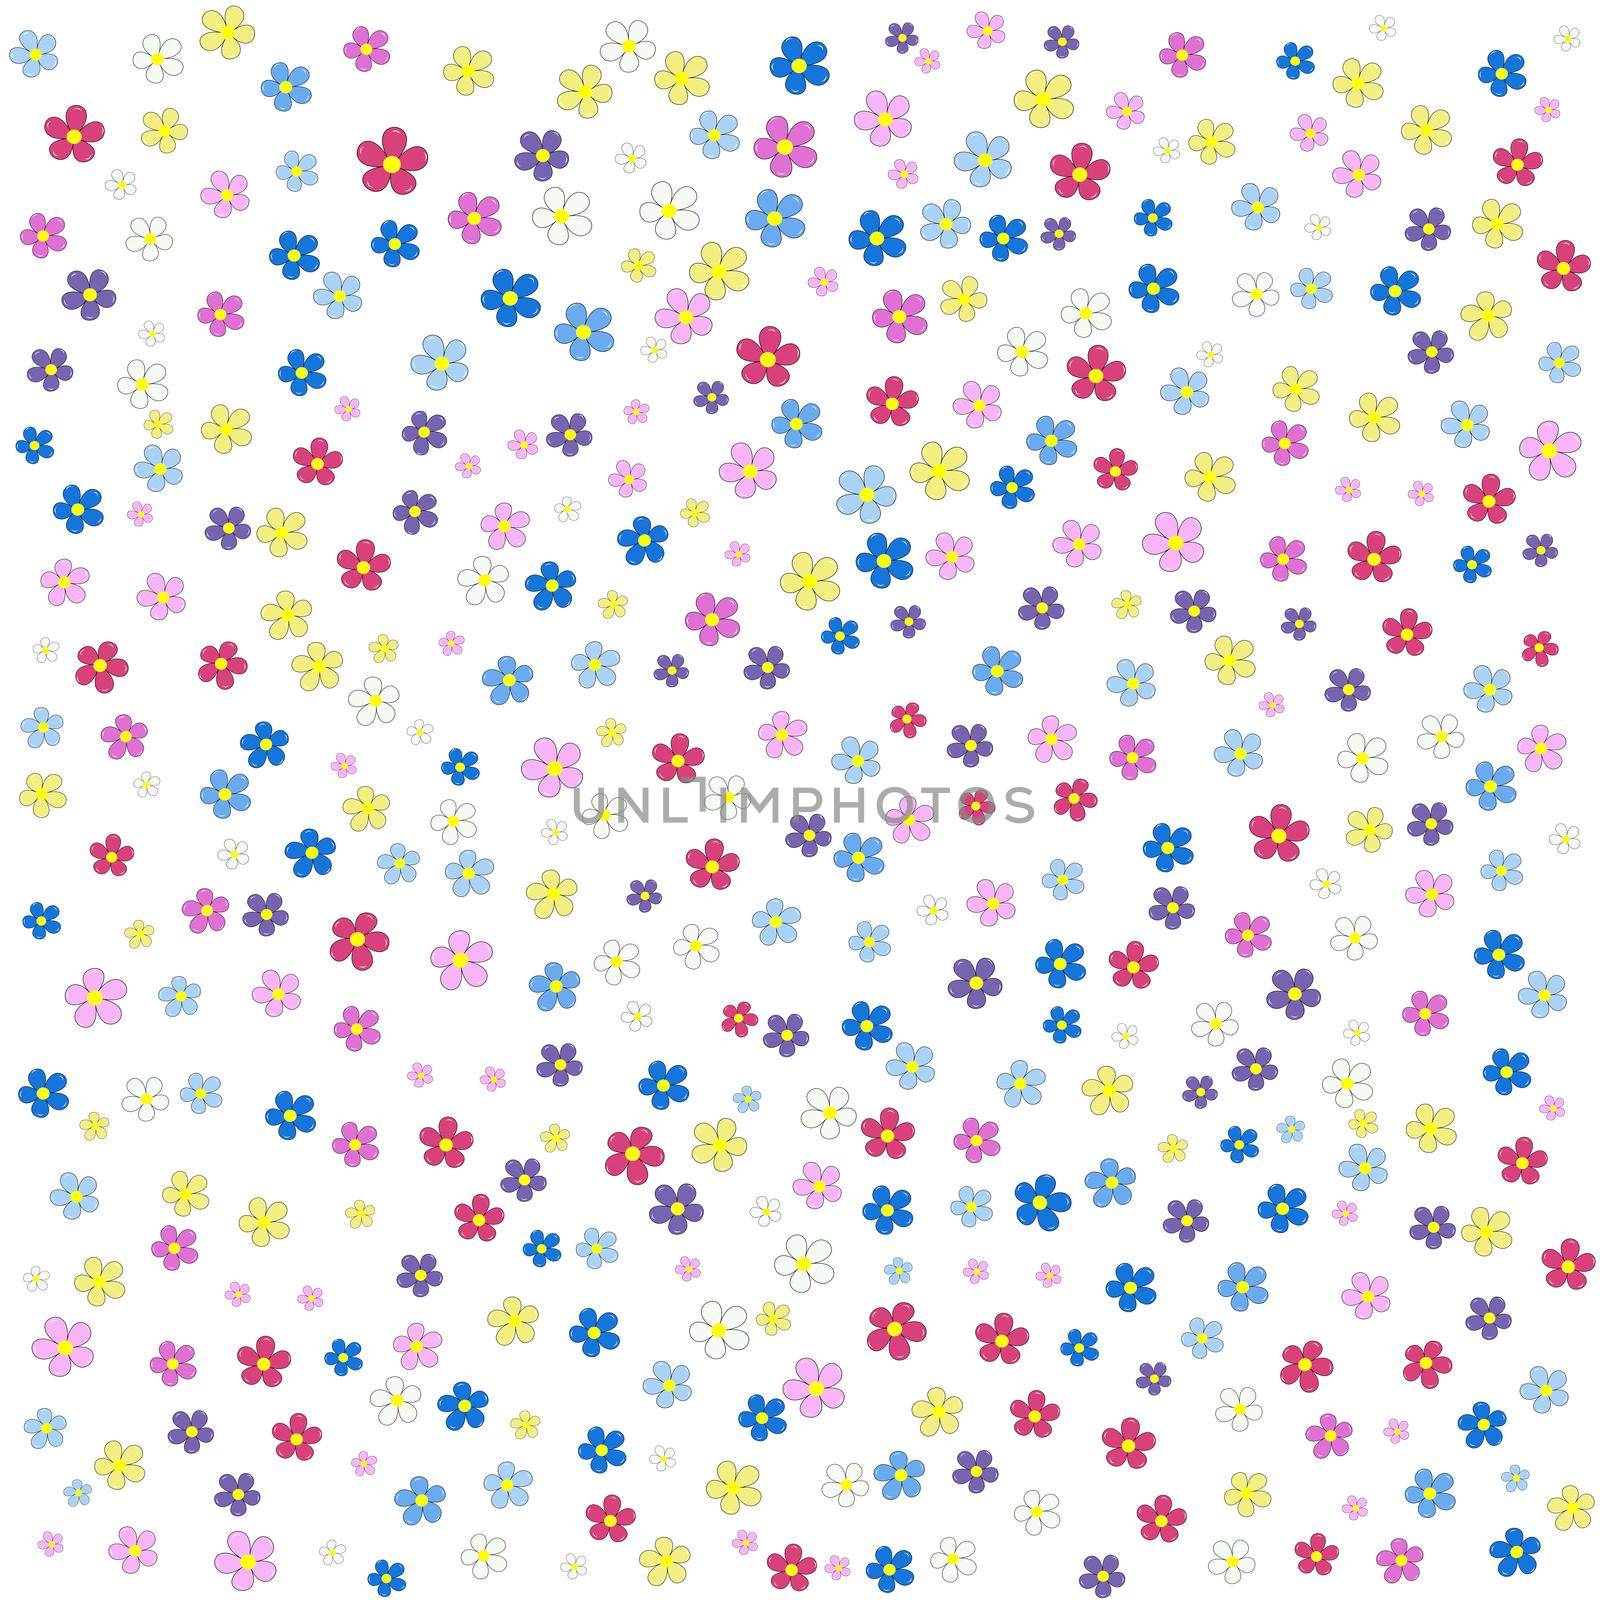 Simple colorful floral background with colored flowers